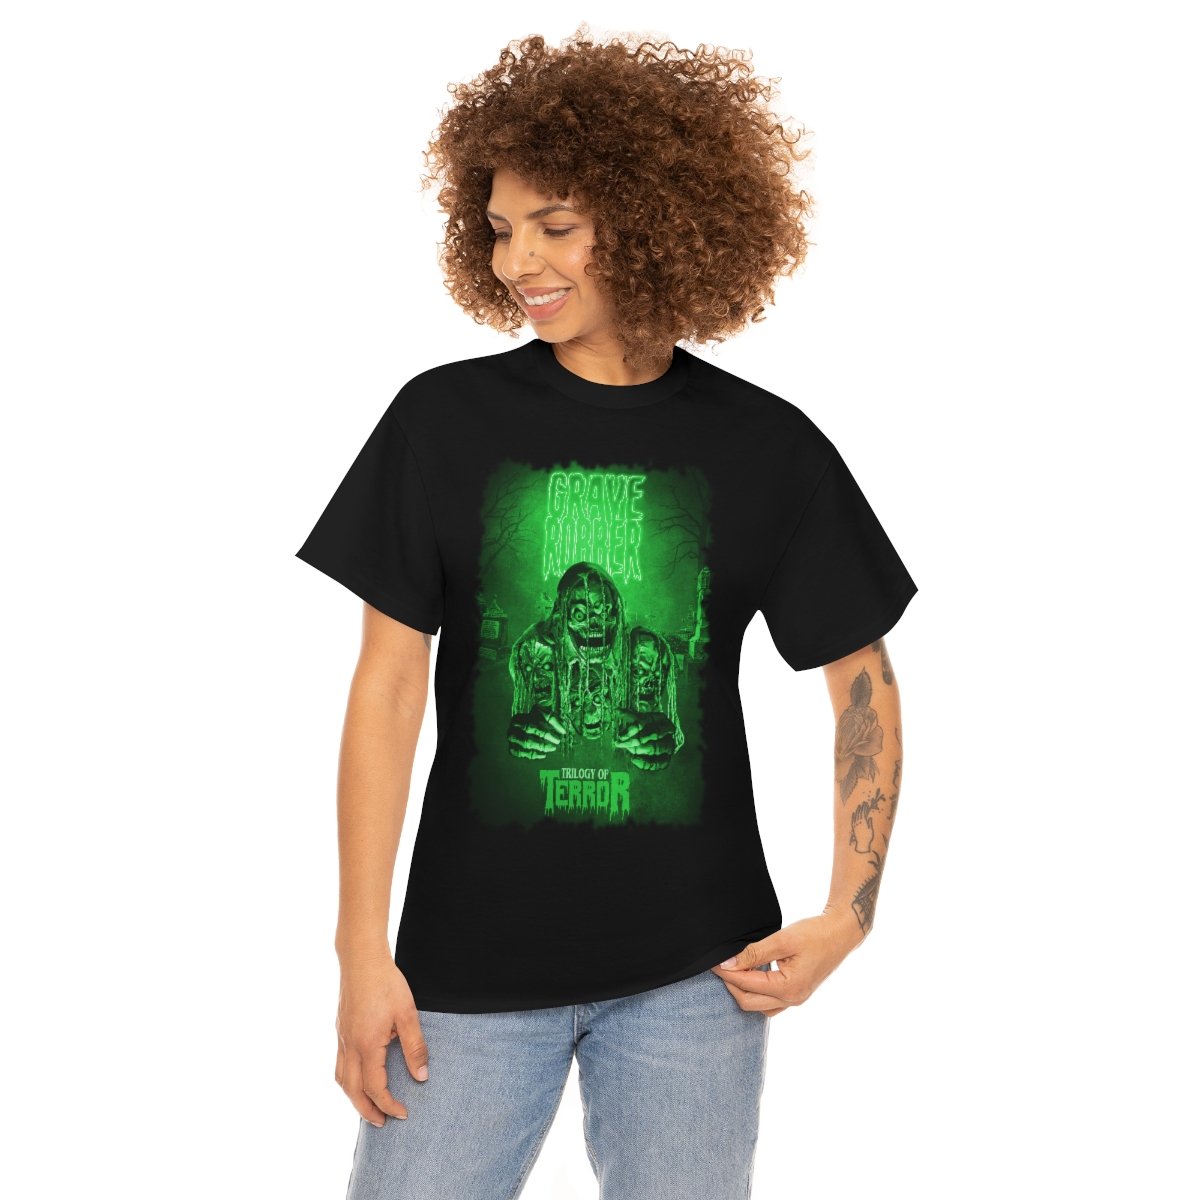 Grave Robber Trilogy of Terror (Limited Edition Green) Short Sleeve Tshirt (5000)